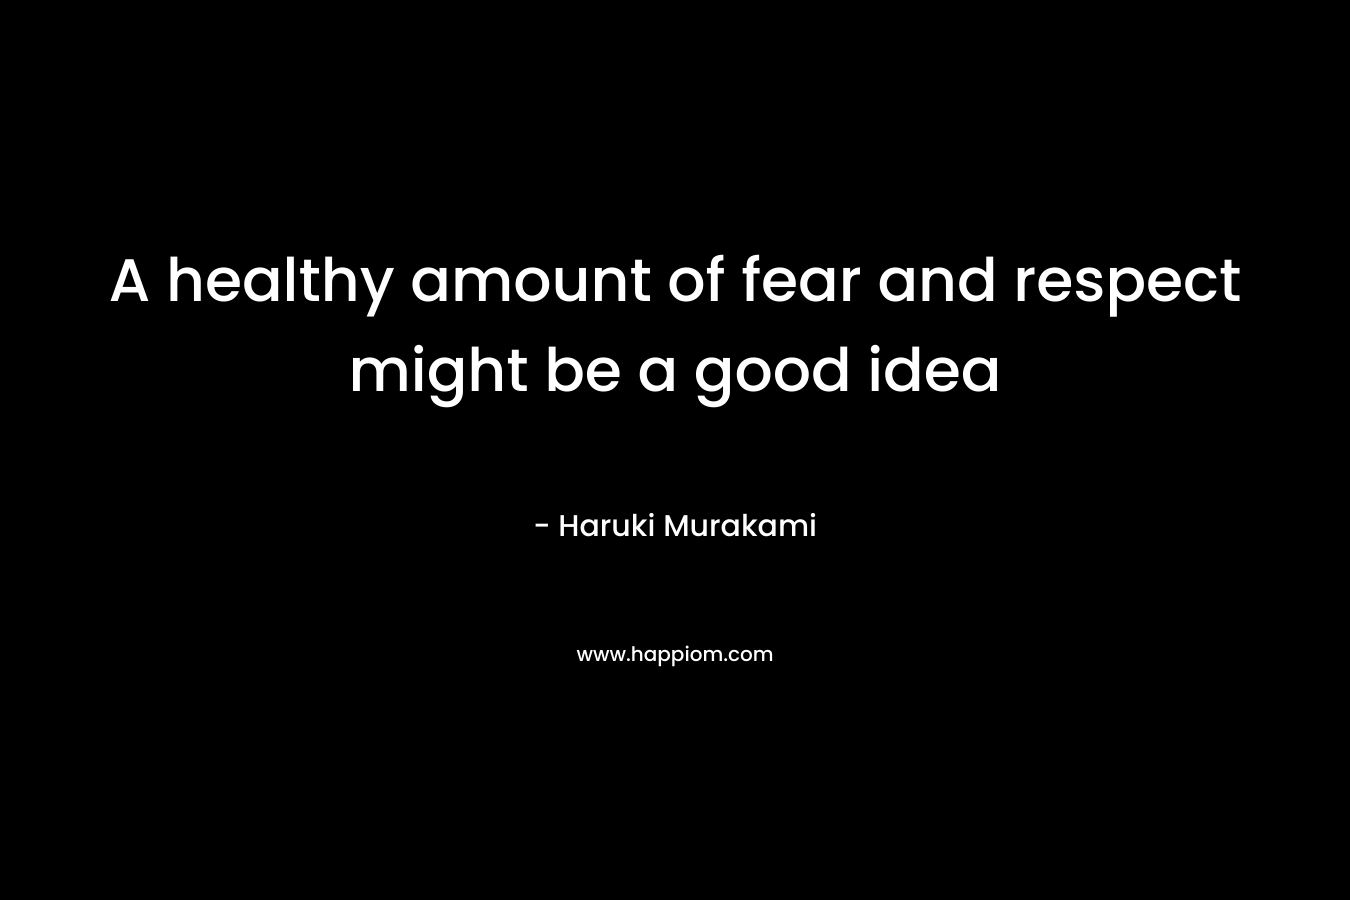 A healthy amount of fear and respect might be a good idea